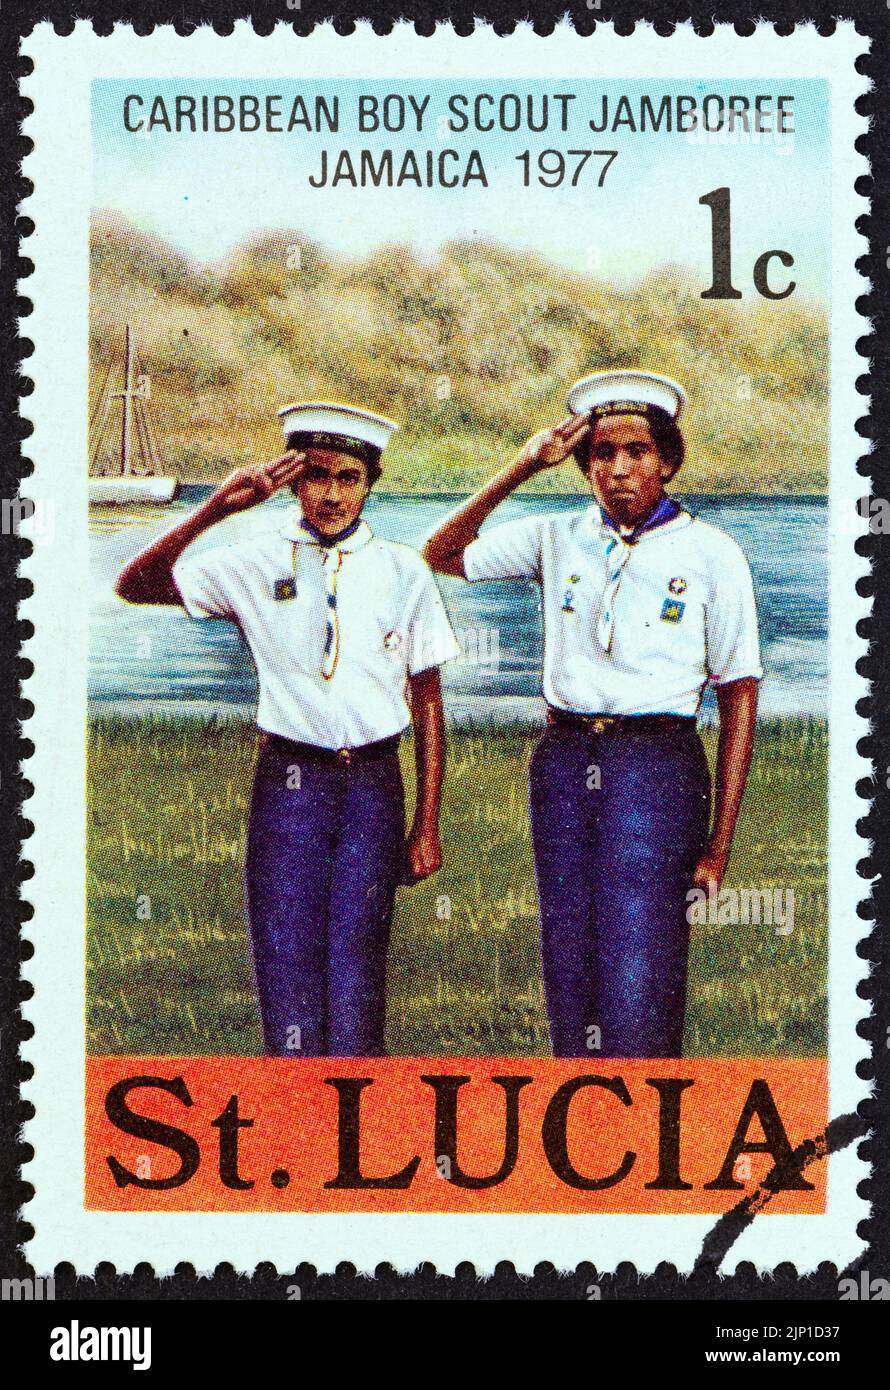 SAINT LUCIA - CIRCA 1977: A stamp printed in Saint Lucia from the 'Caribbean Boy Scout Jamboree' issue shows Sea scouts, circa 1977. Stock Photo